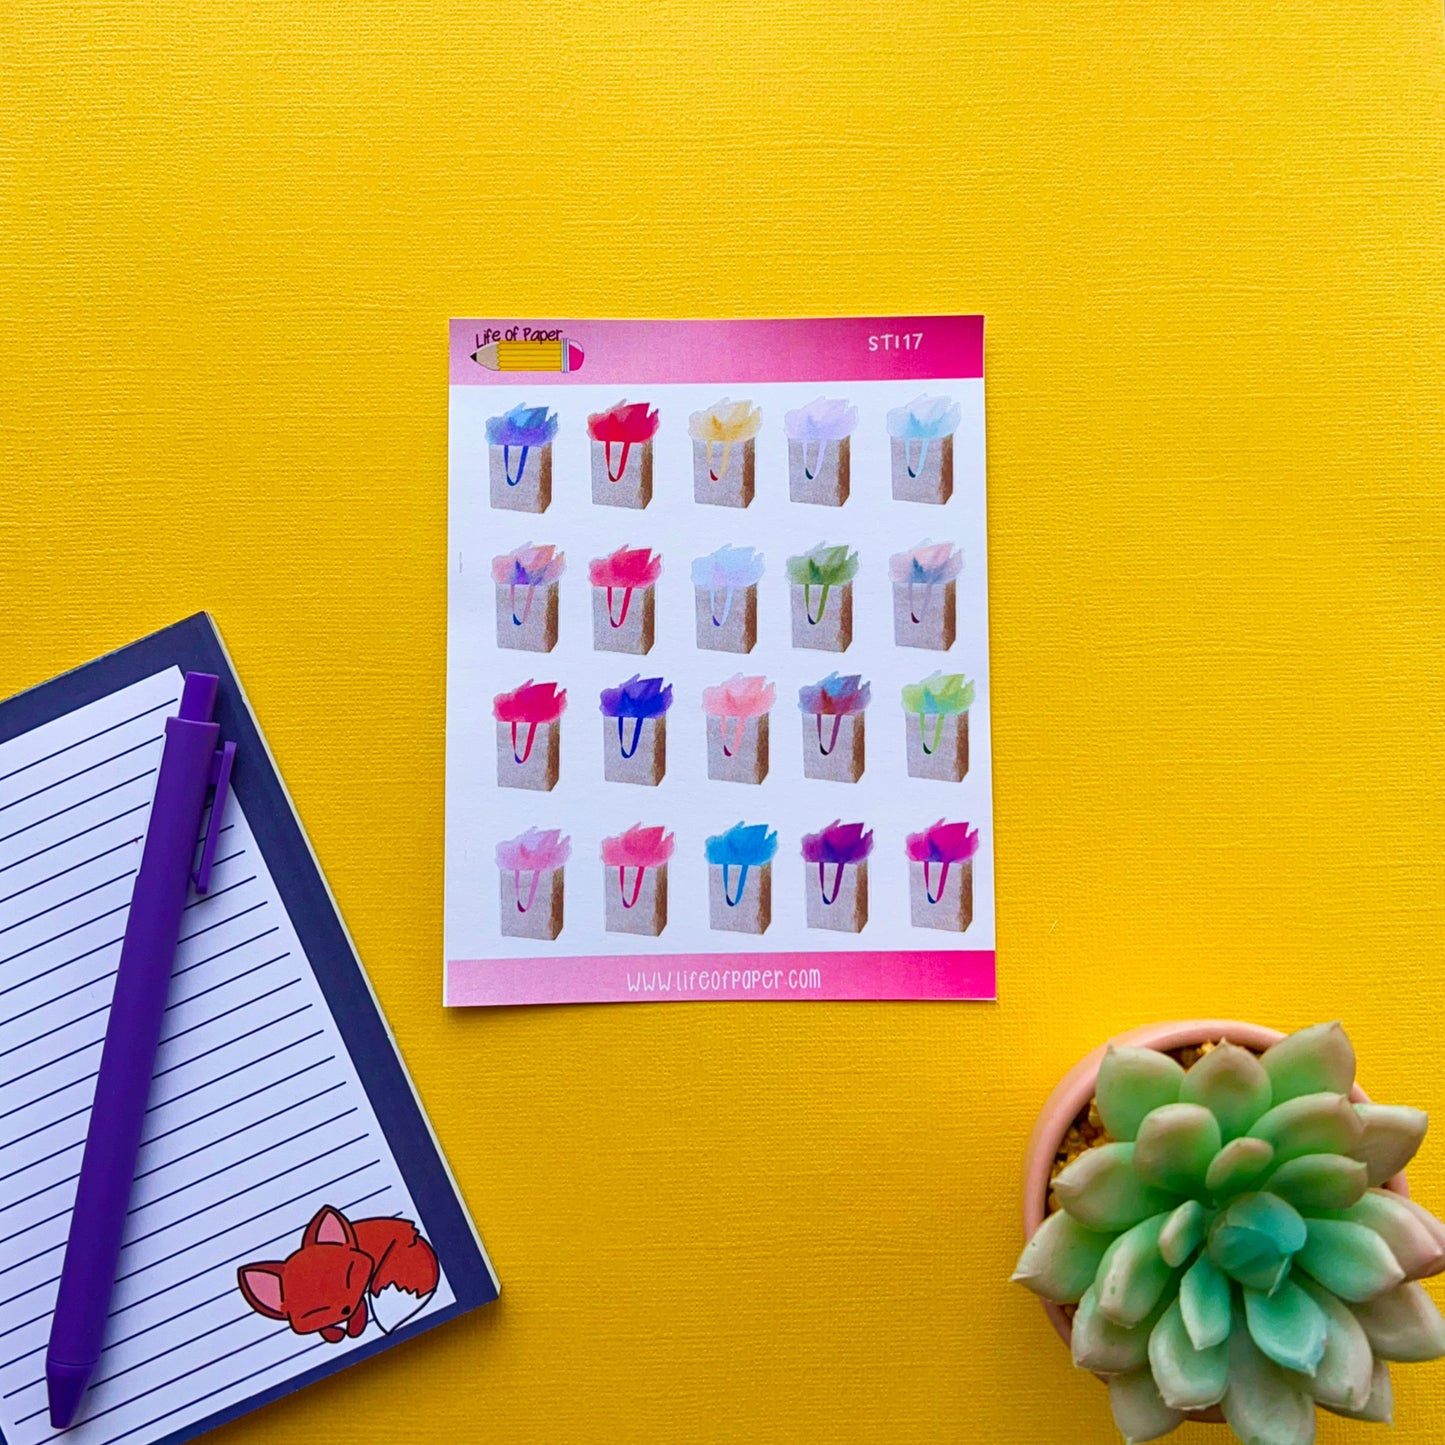 A bright yellow background showcases a sheet of Gift Bag Planner Stickers depicting various colorful drinks with straws. To the left, there's a lined notebook with a fox sticker and two purple pens. A succulent plant is situated in the bottom right corner.